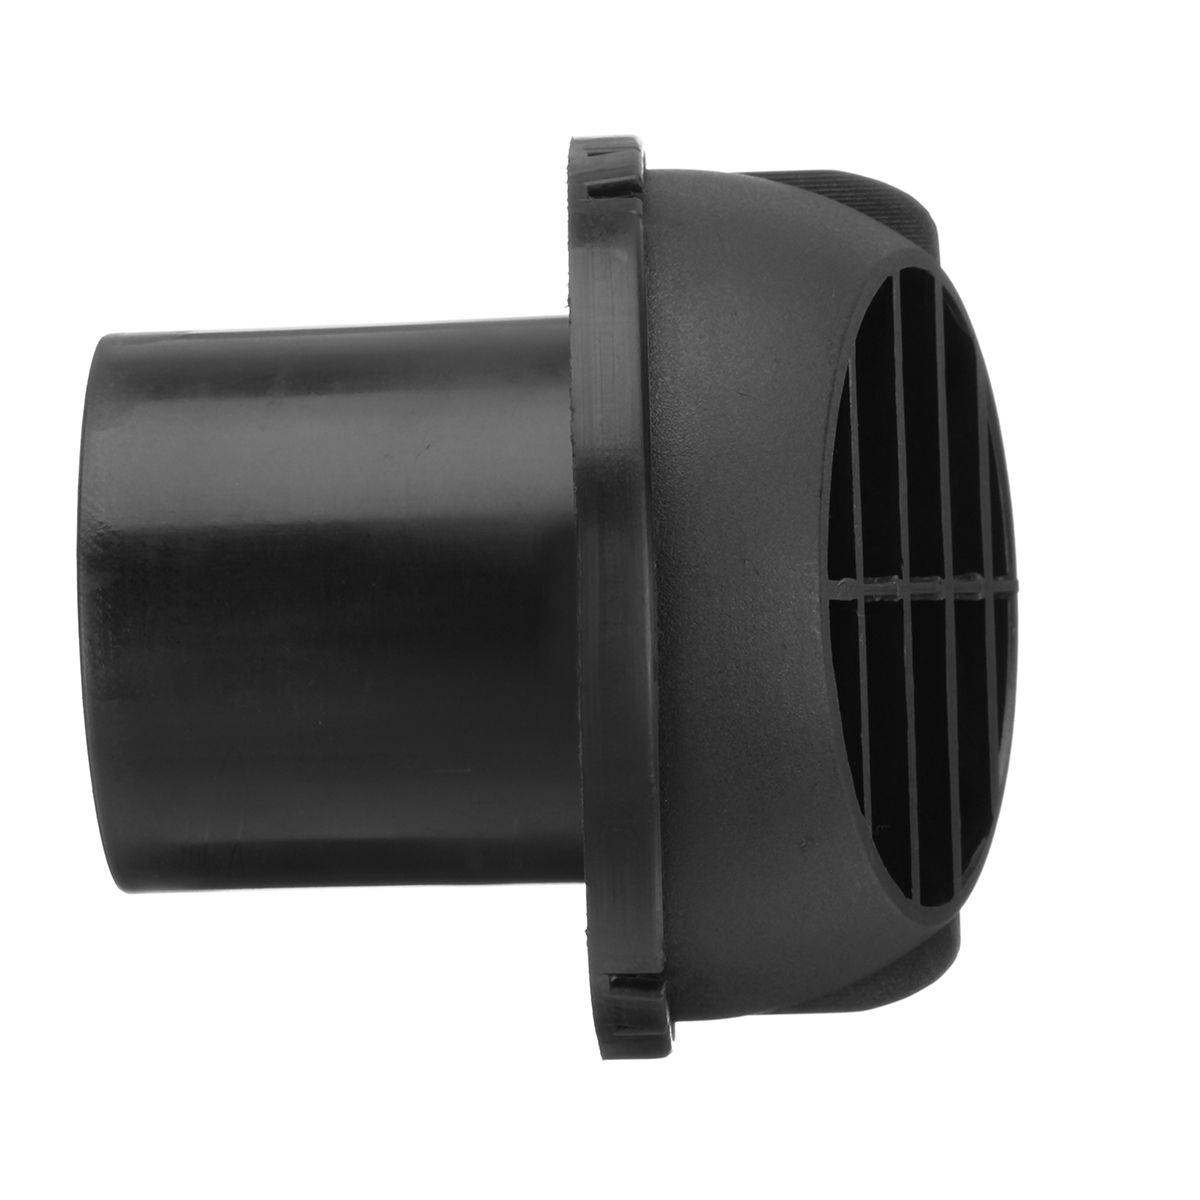 60mm-Warm-Heater-Parking-Heater-Car-Heater-Air-Outlet-Directional-Rotatable-1296280